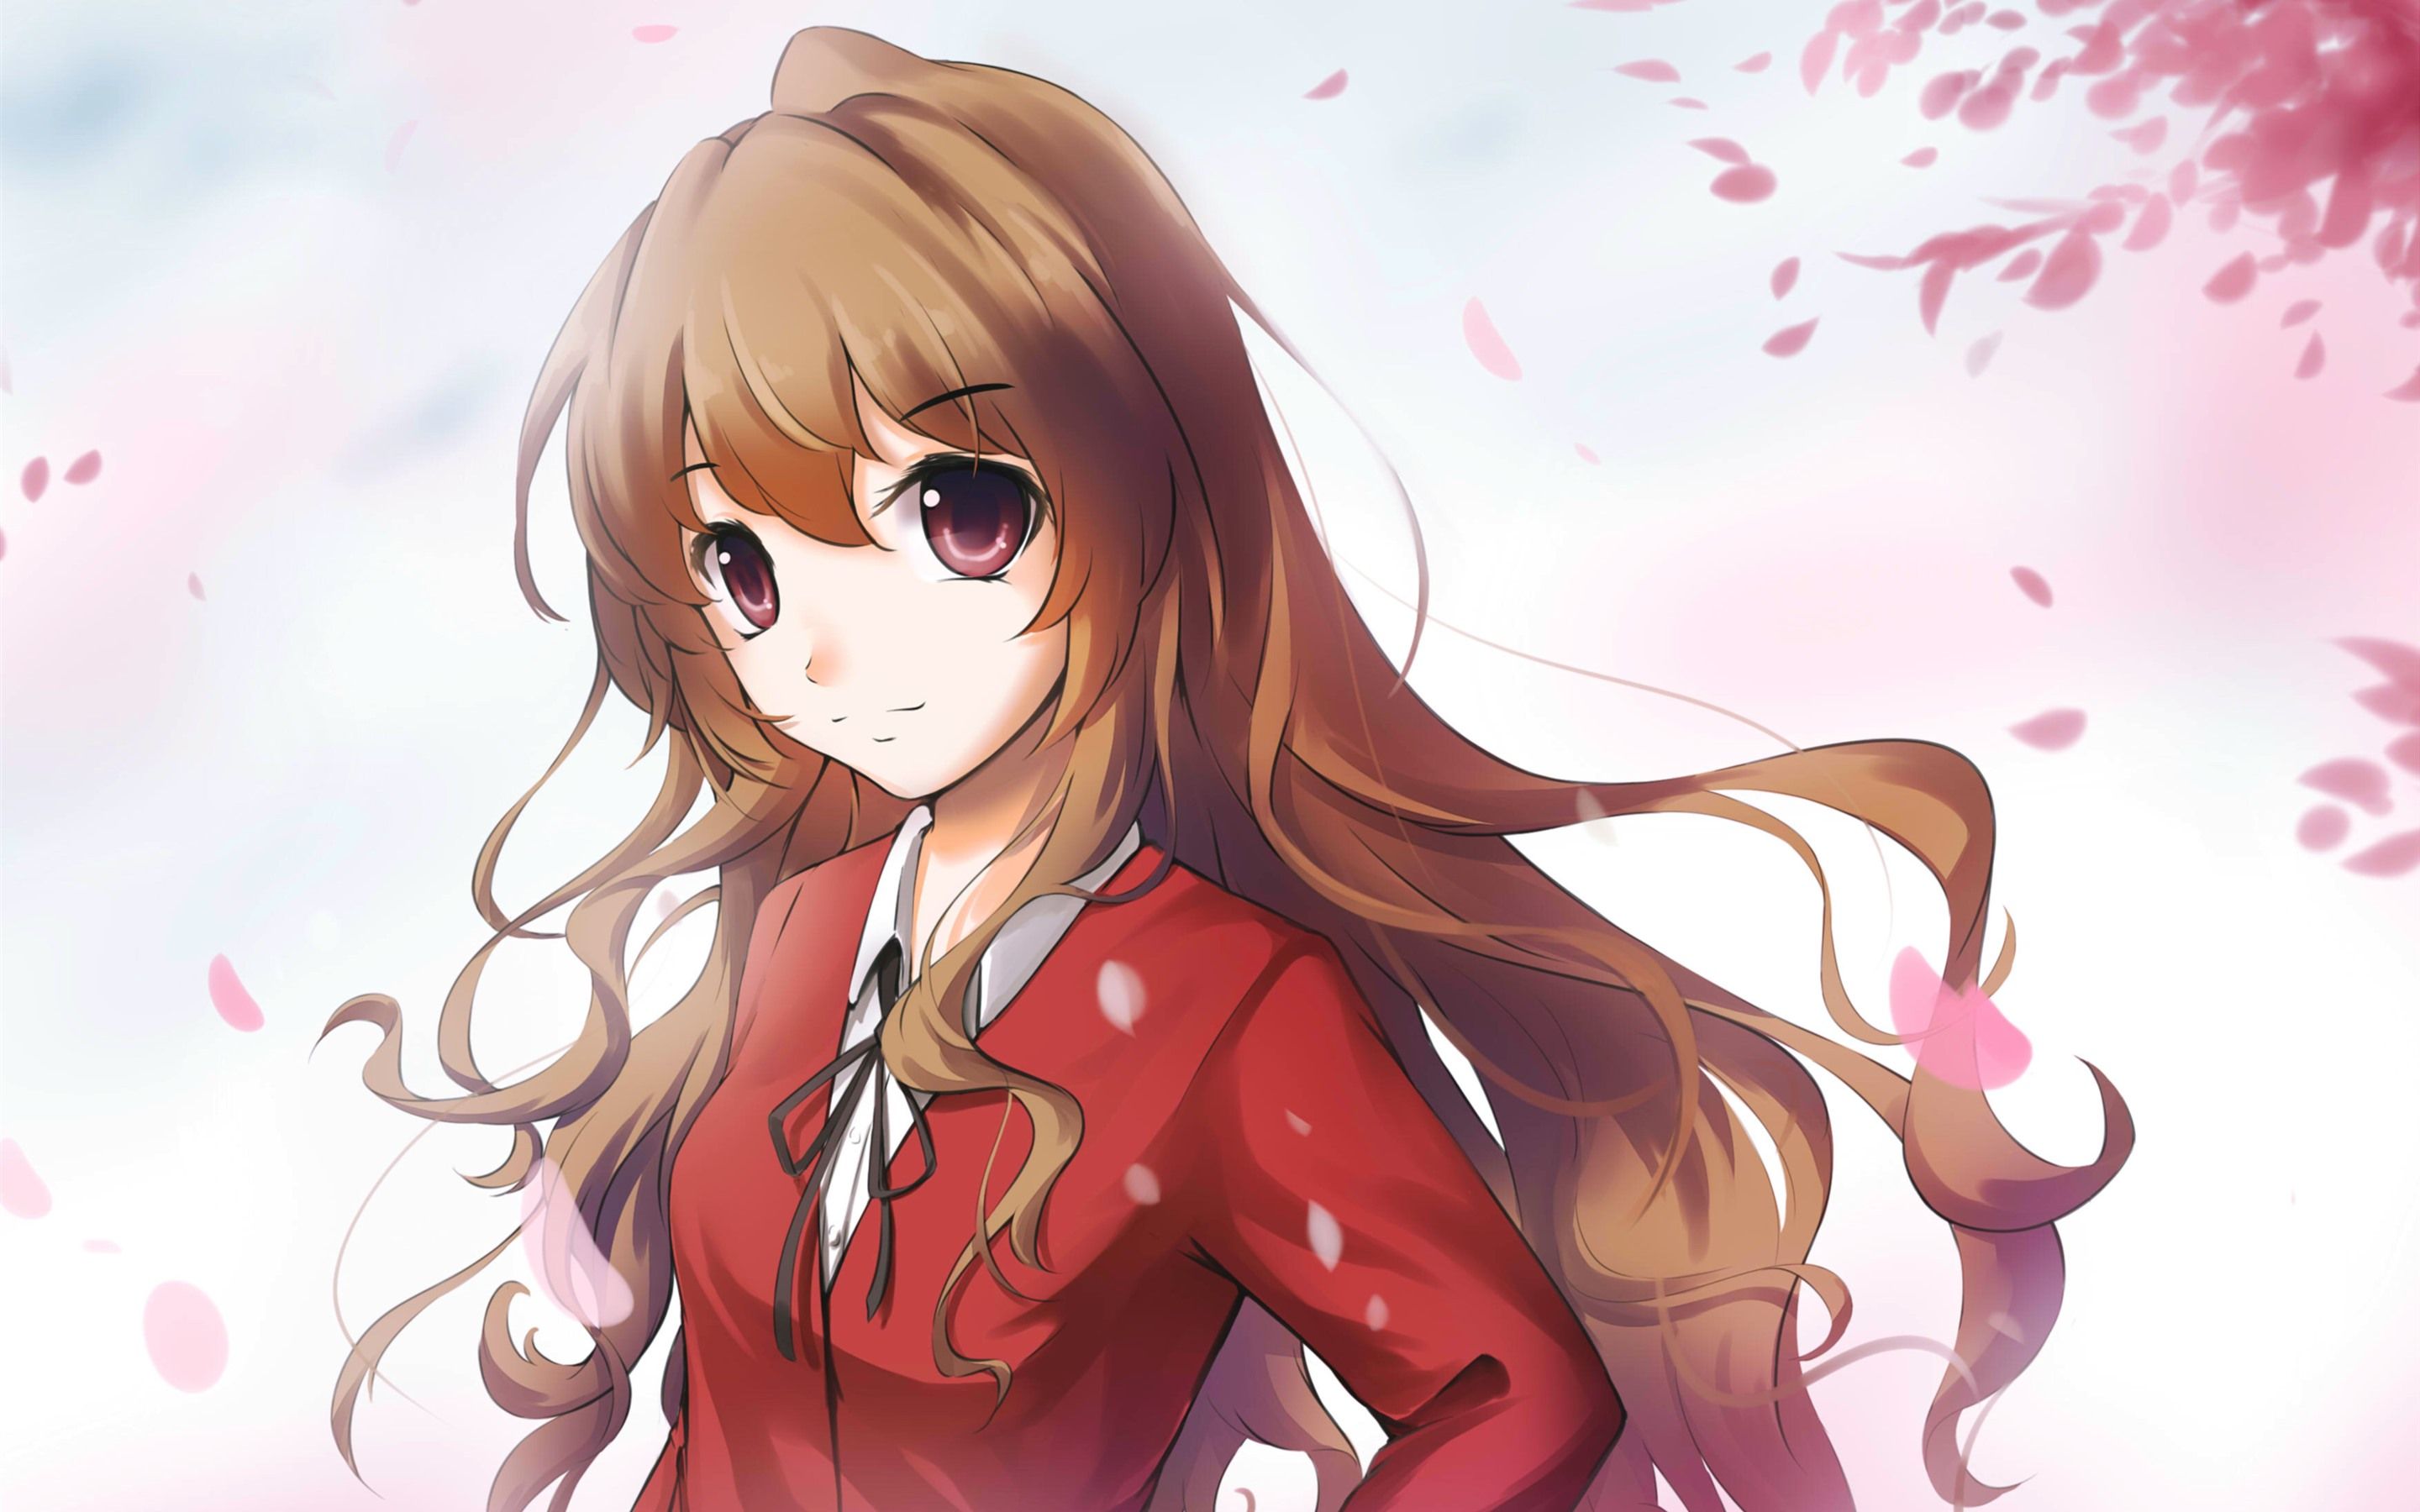 Wallpaper Brown hair anime girl, pink leaves 2880x1800 HD Picture, Image